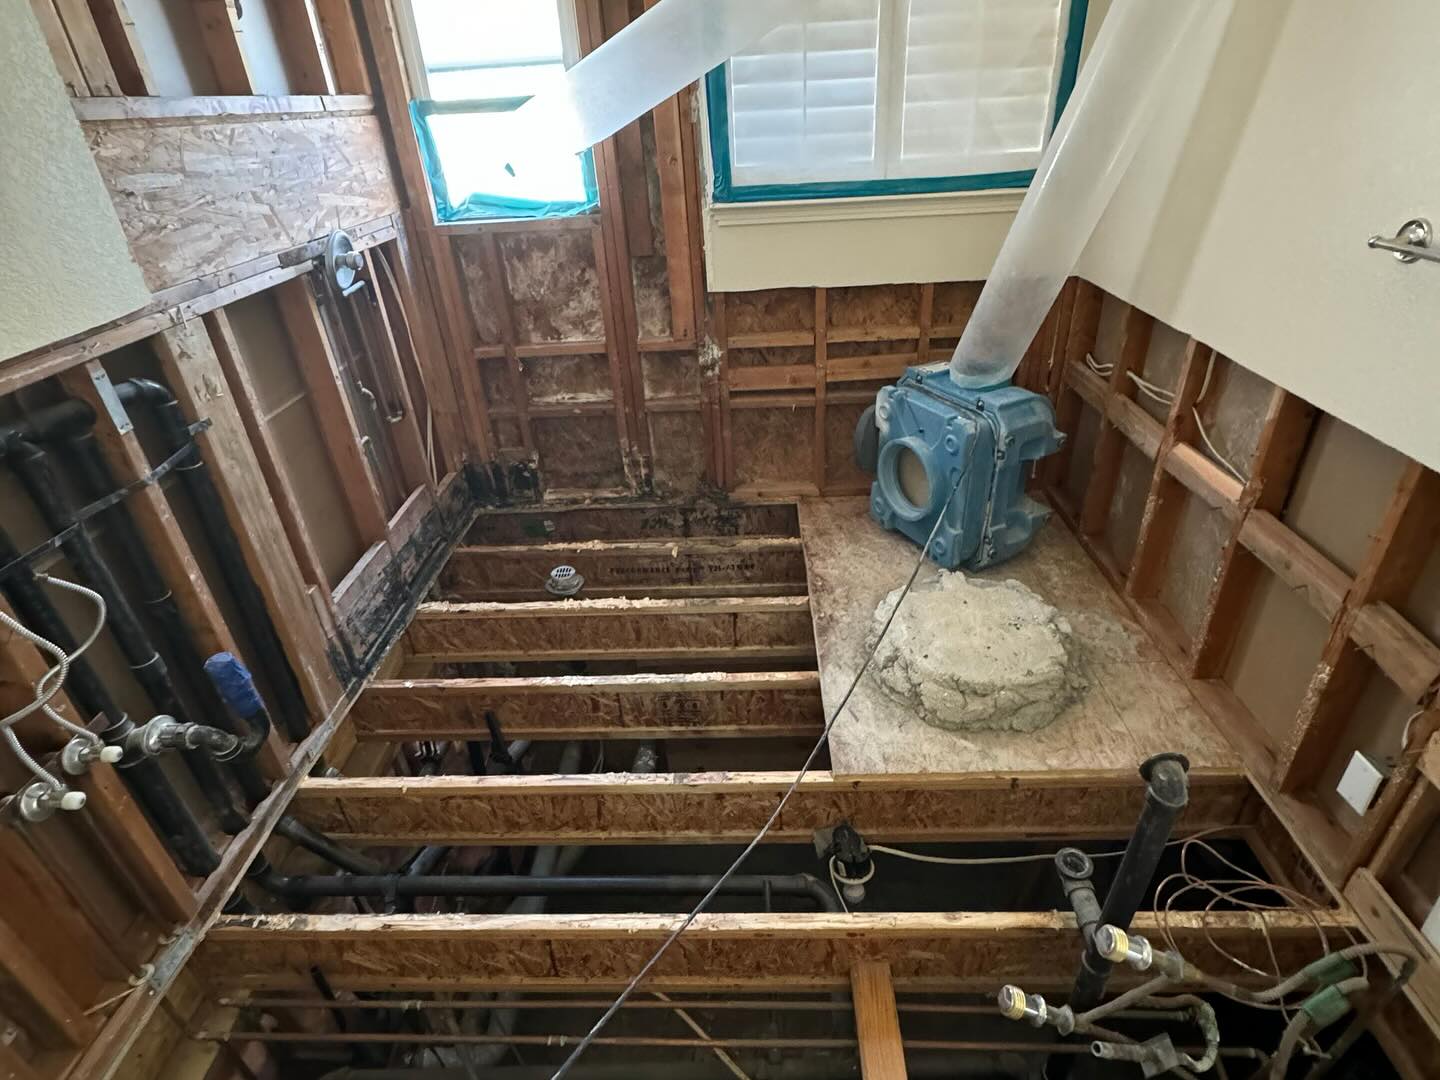 Interior of a building under renovation, showing exposed wooden beams, plumbing pipes, and a dismantled floor with a visible concrete foundation.